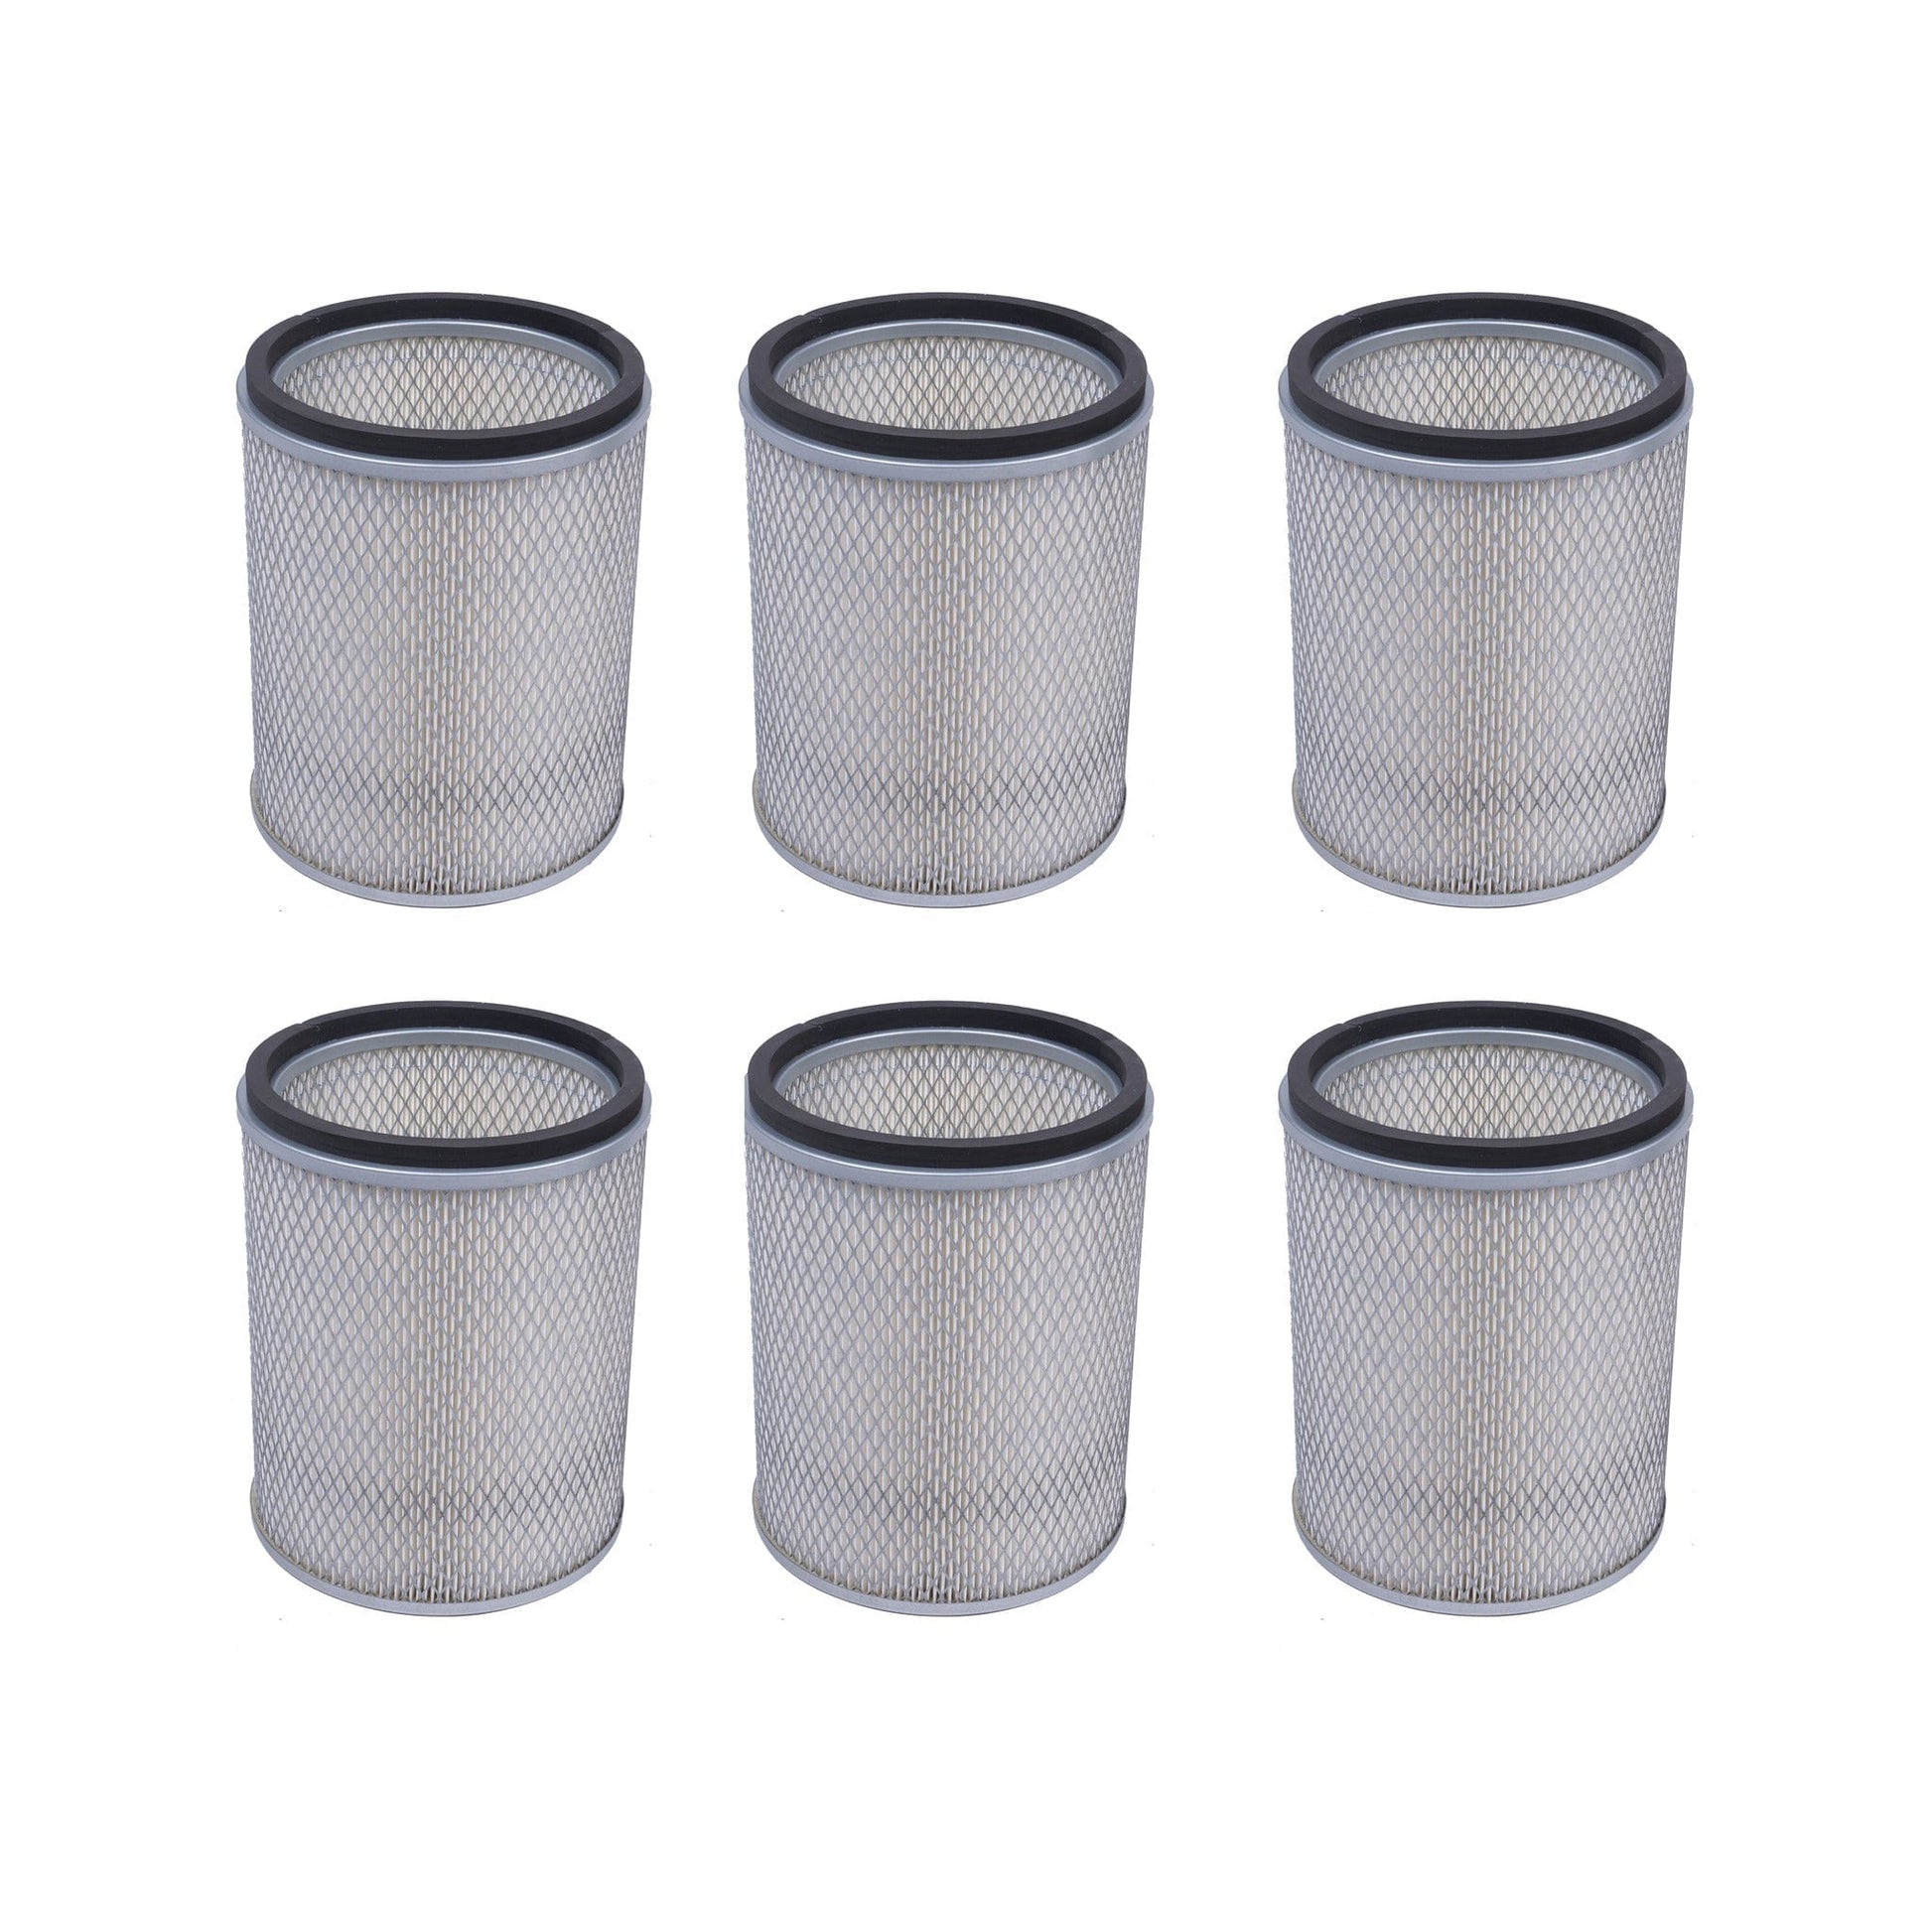 PowerQUAD Standard Filter 6-Pack